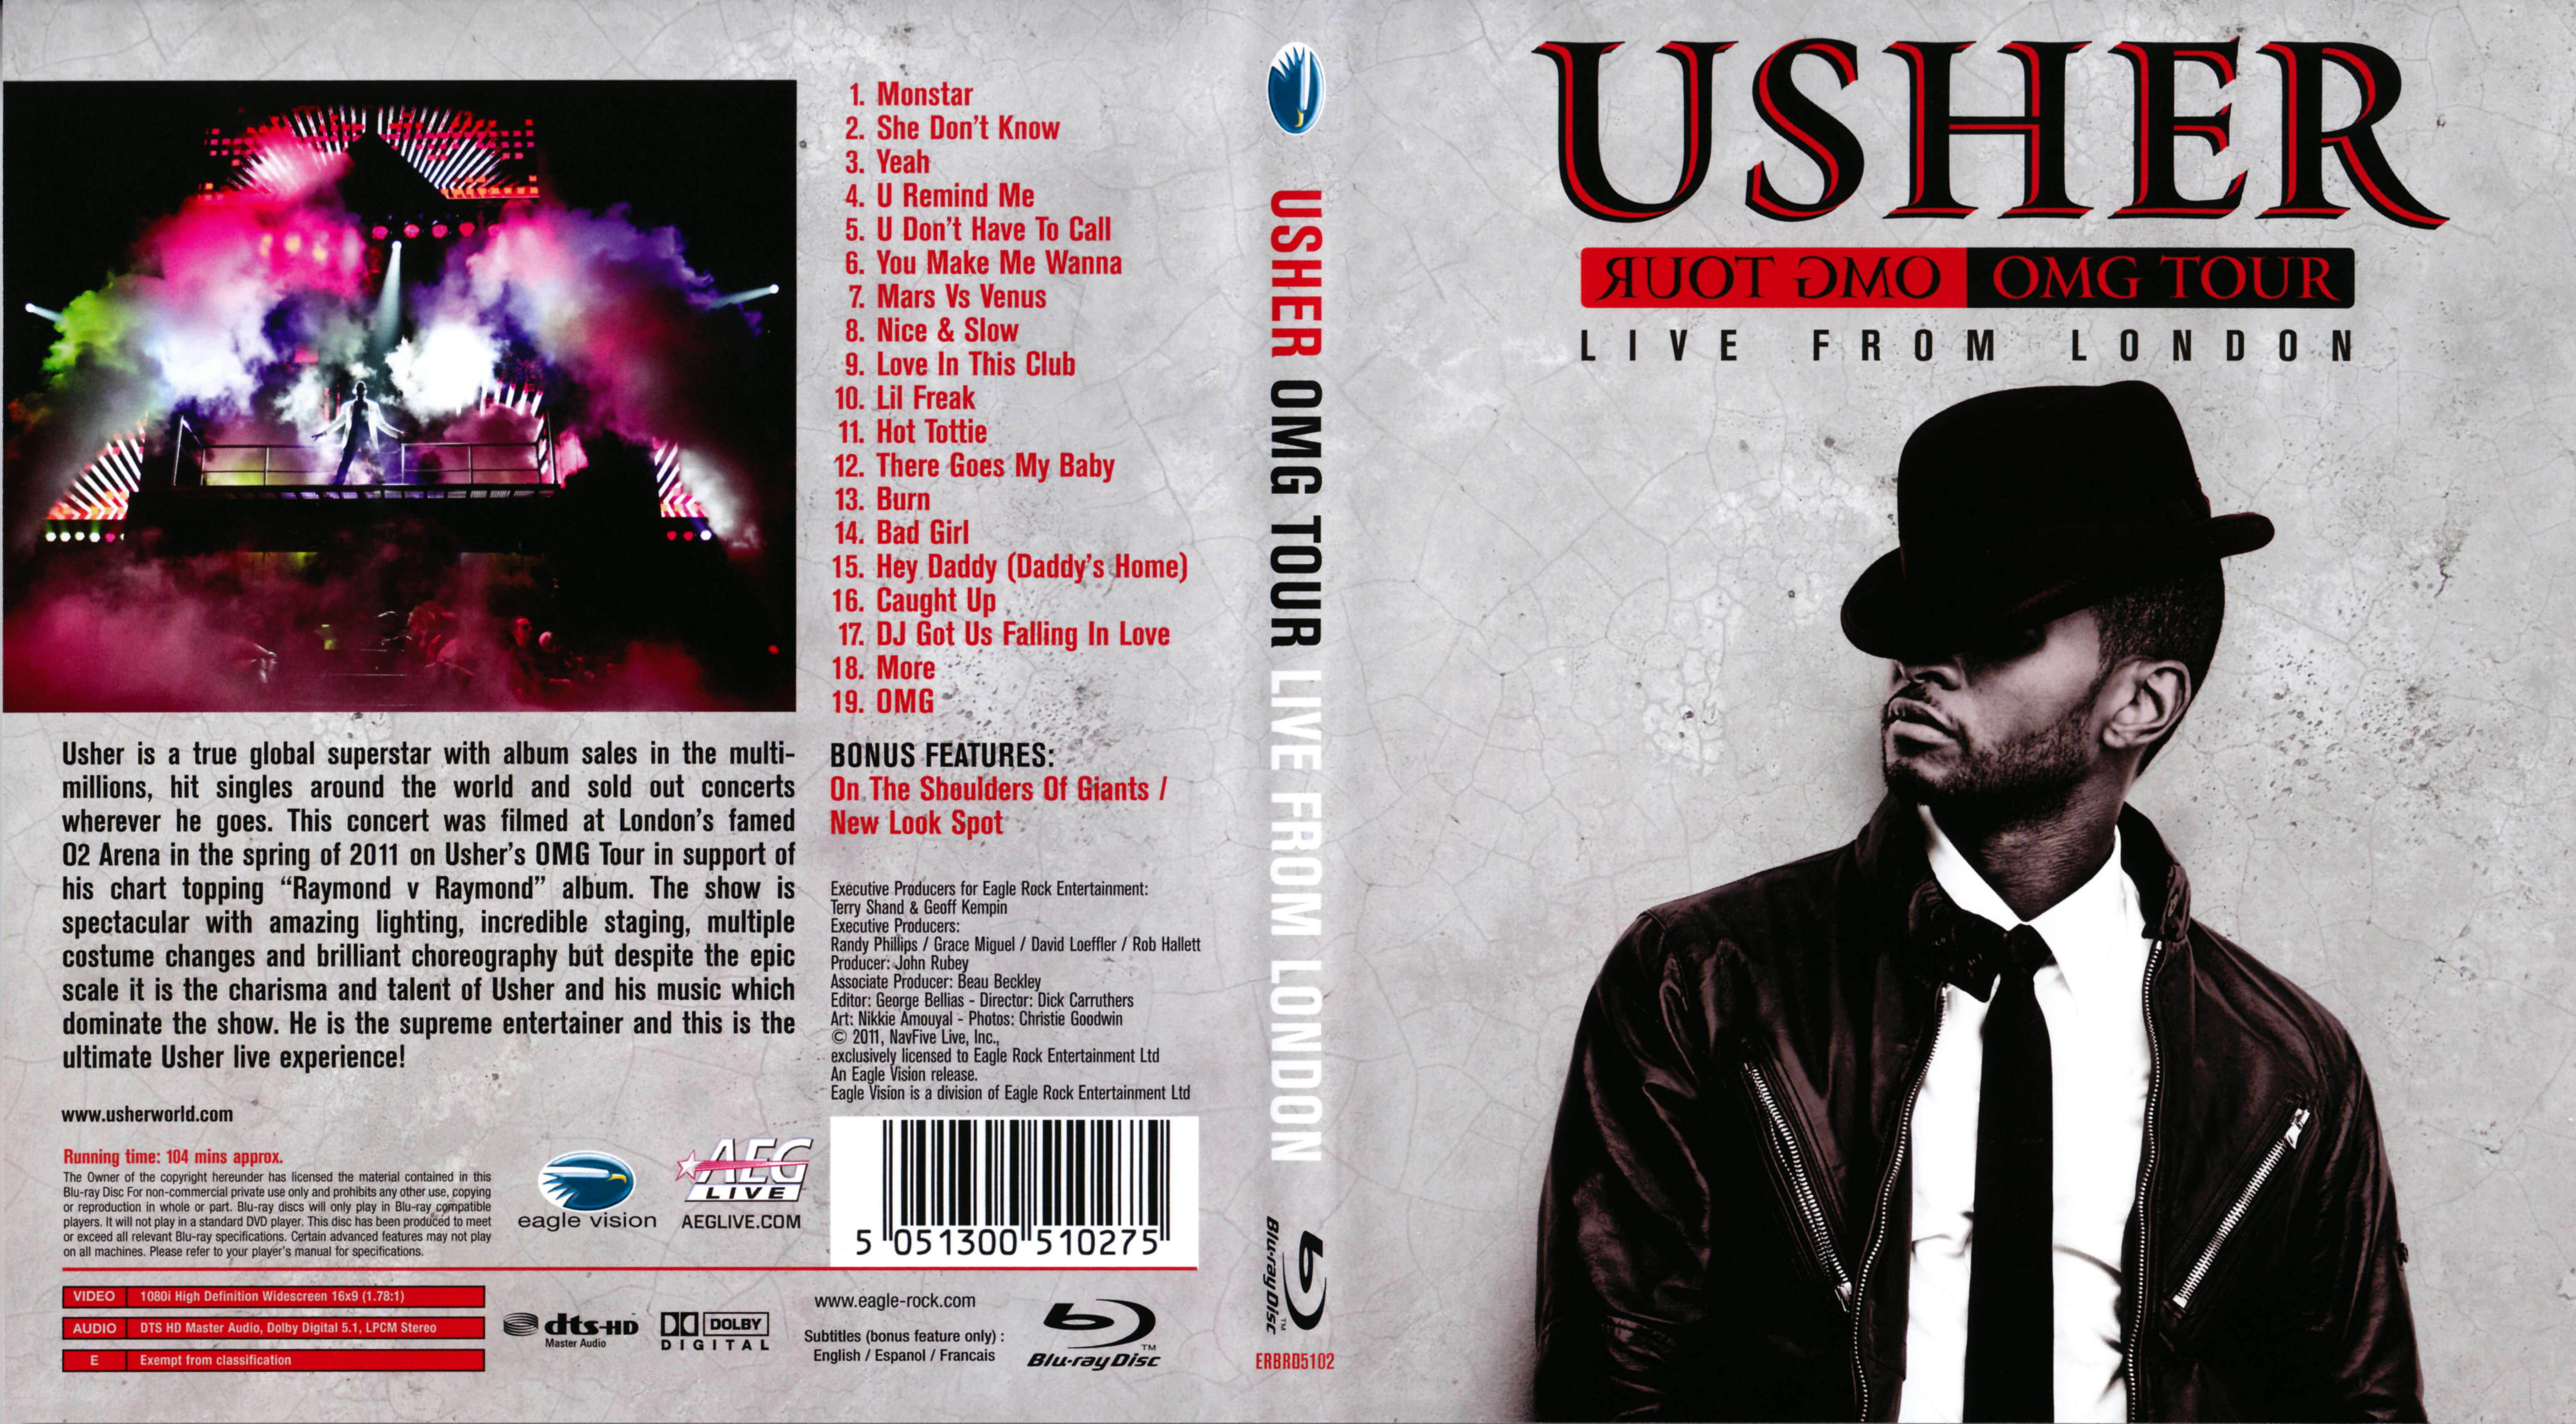 Jaquette DVD Usher OMG tour live from London (BLU-RAY)